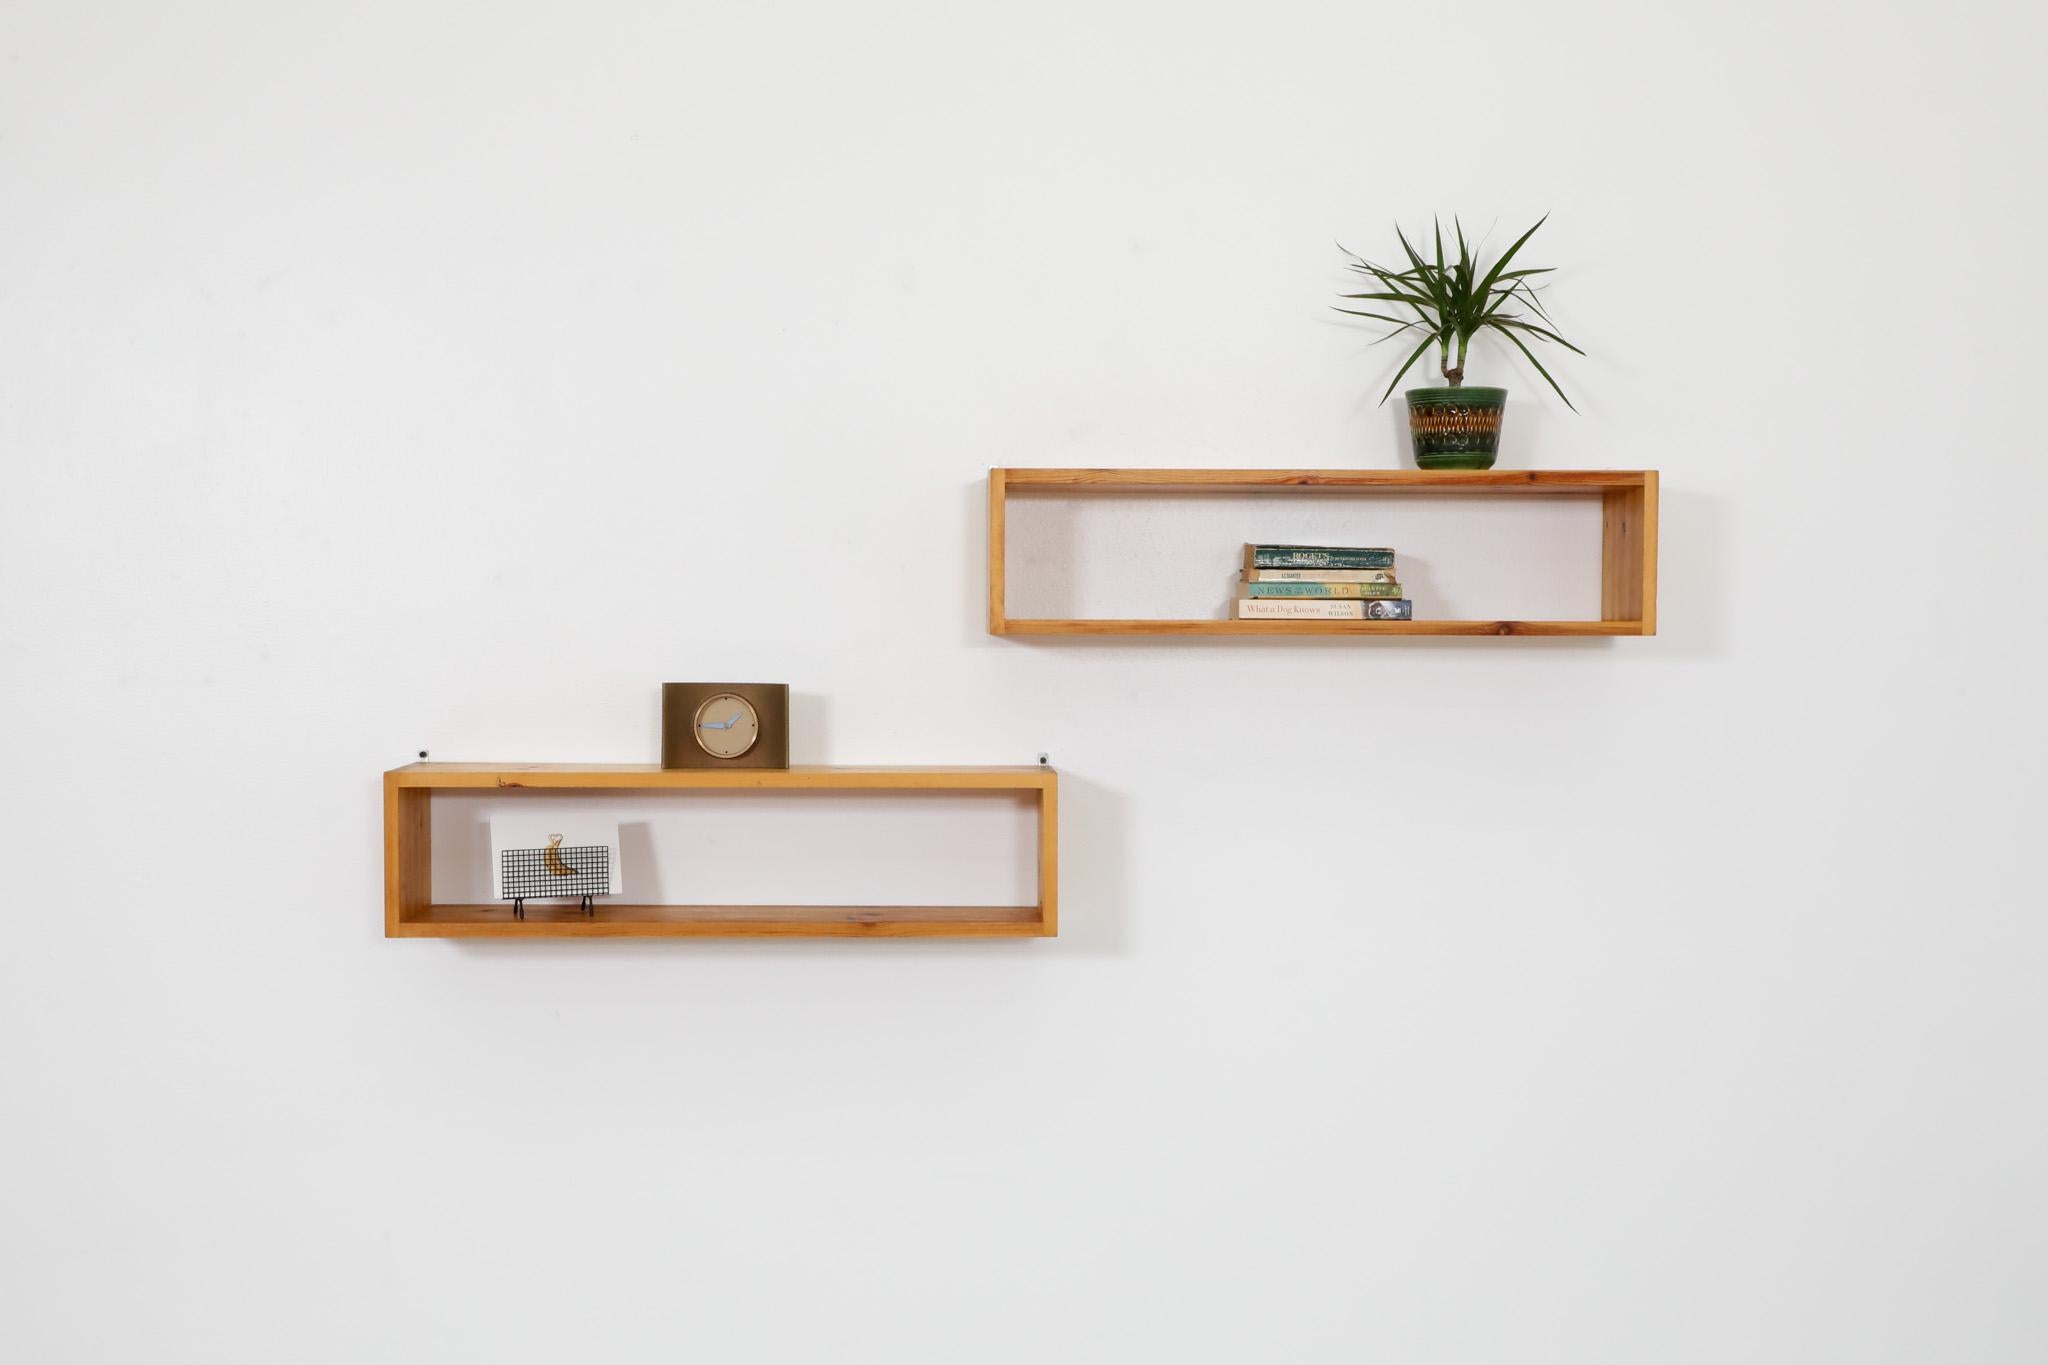 Beautiful, 1970's, Mid-century Ate van Apeldoorn designed floating pine wall mount shelf with well-crafted square box joints. In 1958, Dutchman Ate van Apeldoorn established his own wood furniture manufacturing company, the 